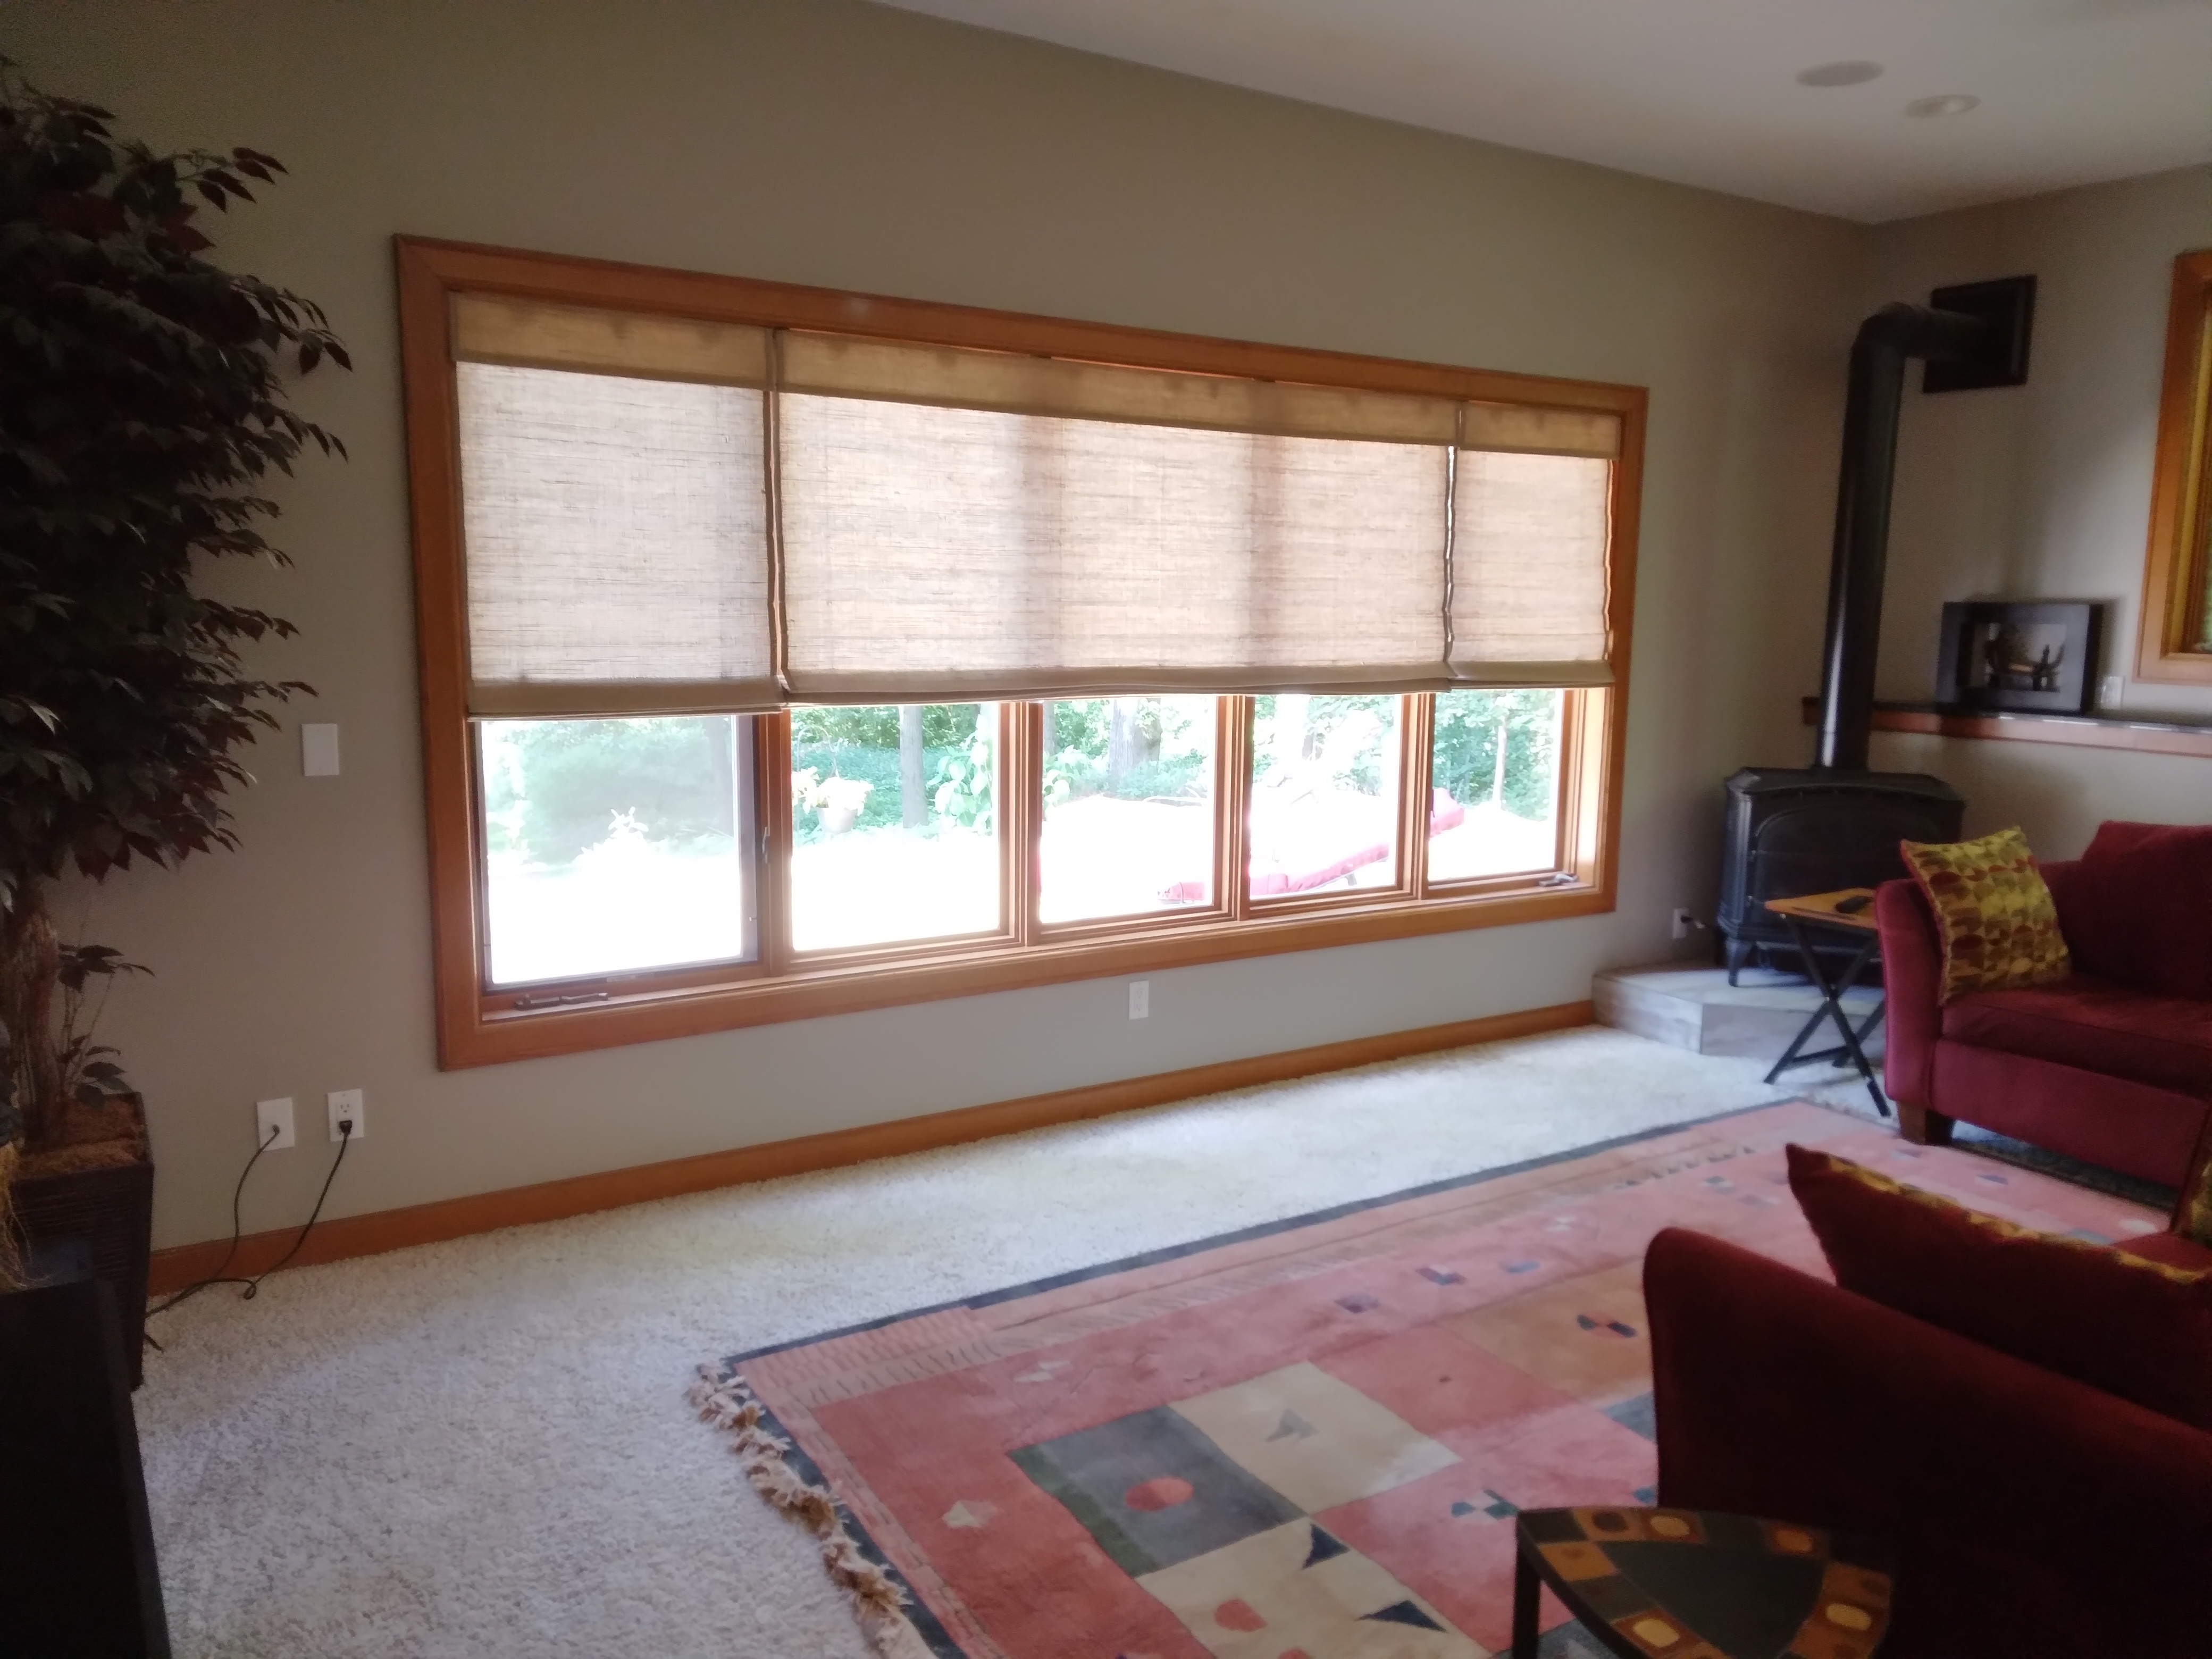 Cordless, light-filtering natural shades in Springfield Illinois living room.  BudgetBlinds  WindowCoverings  NaturalShades  SpringfieldIllinois